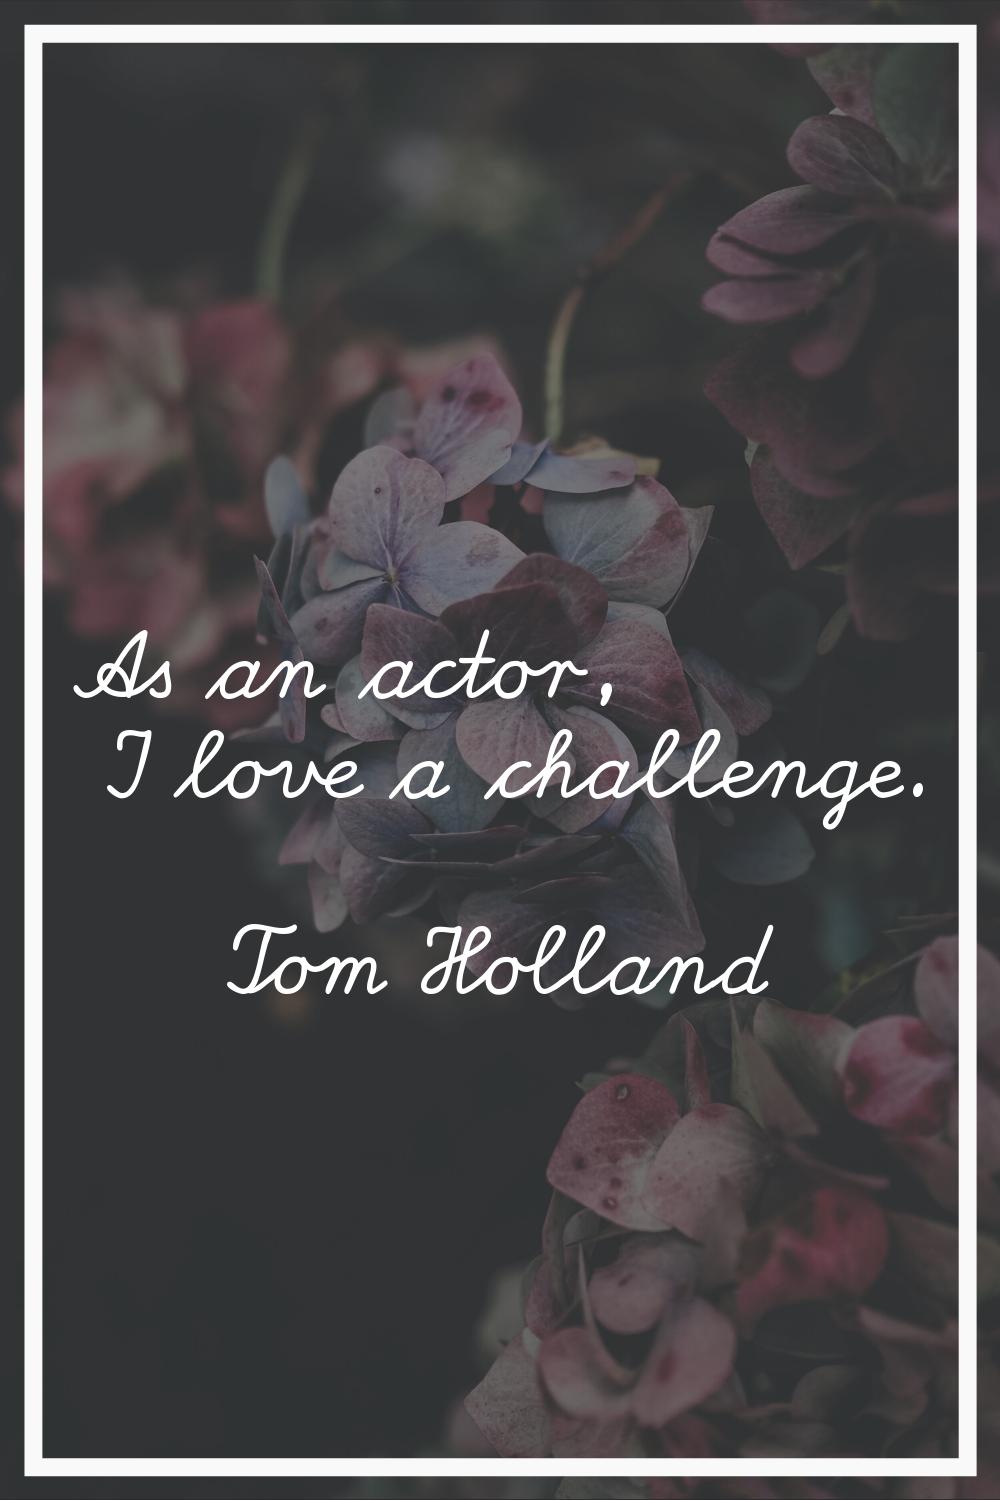 As an actor, I love a challenge.